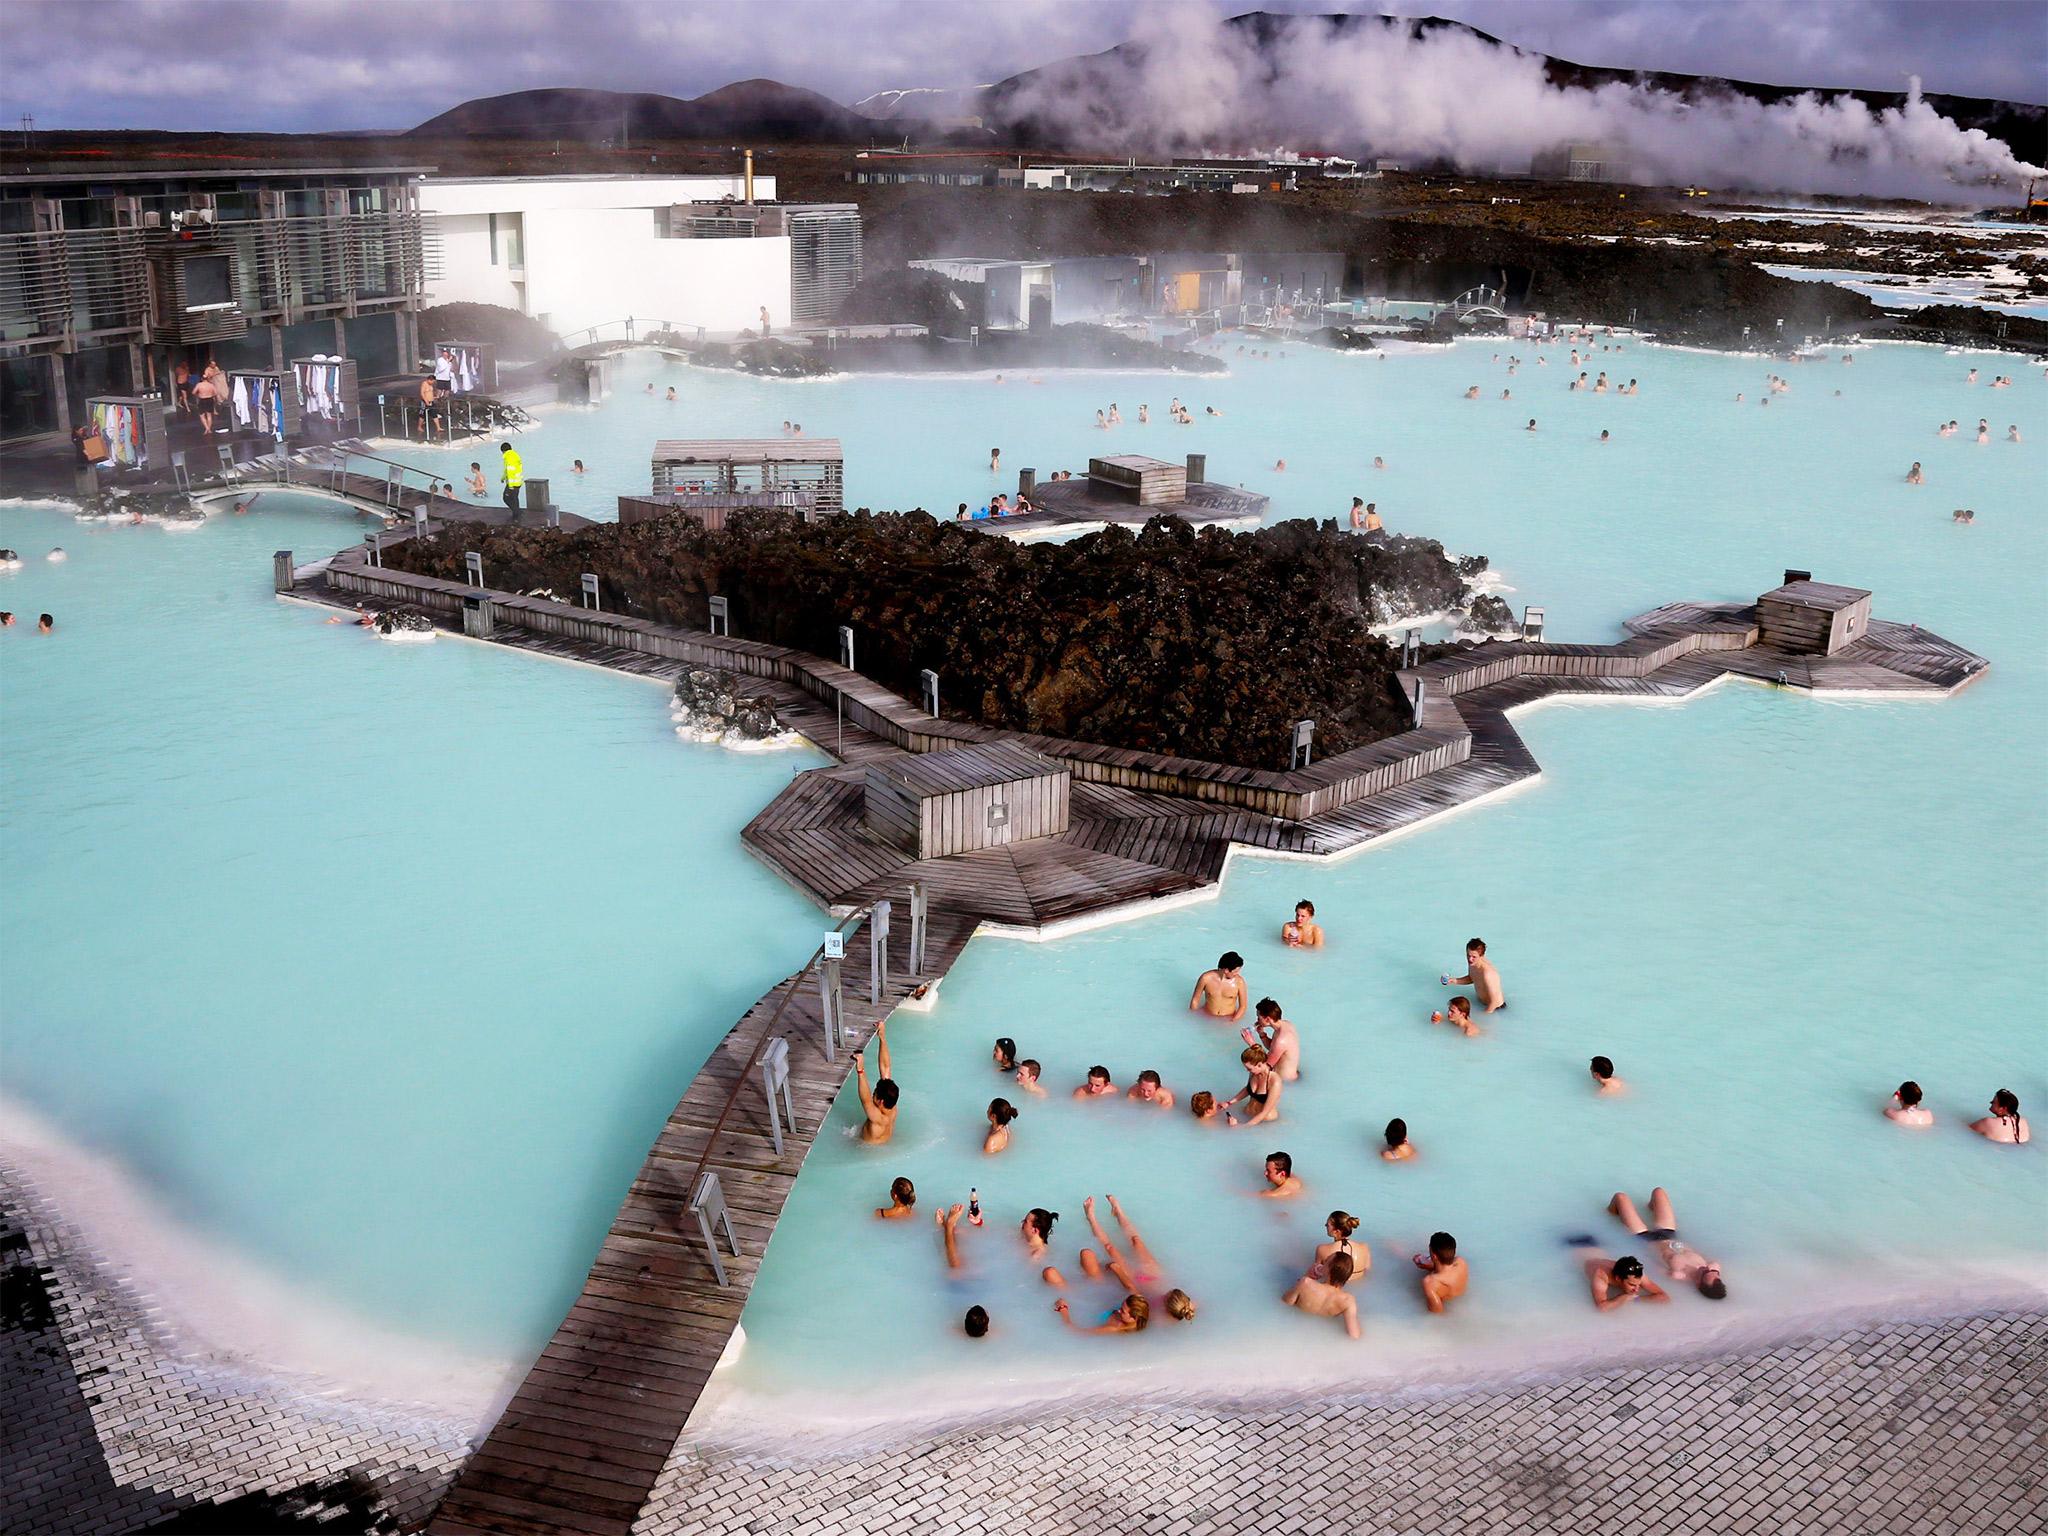 Results from sequencing the entire genomes of 2,636 Icelanders, here in the Blue Lagoon, surprised researchers (Getty)